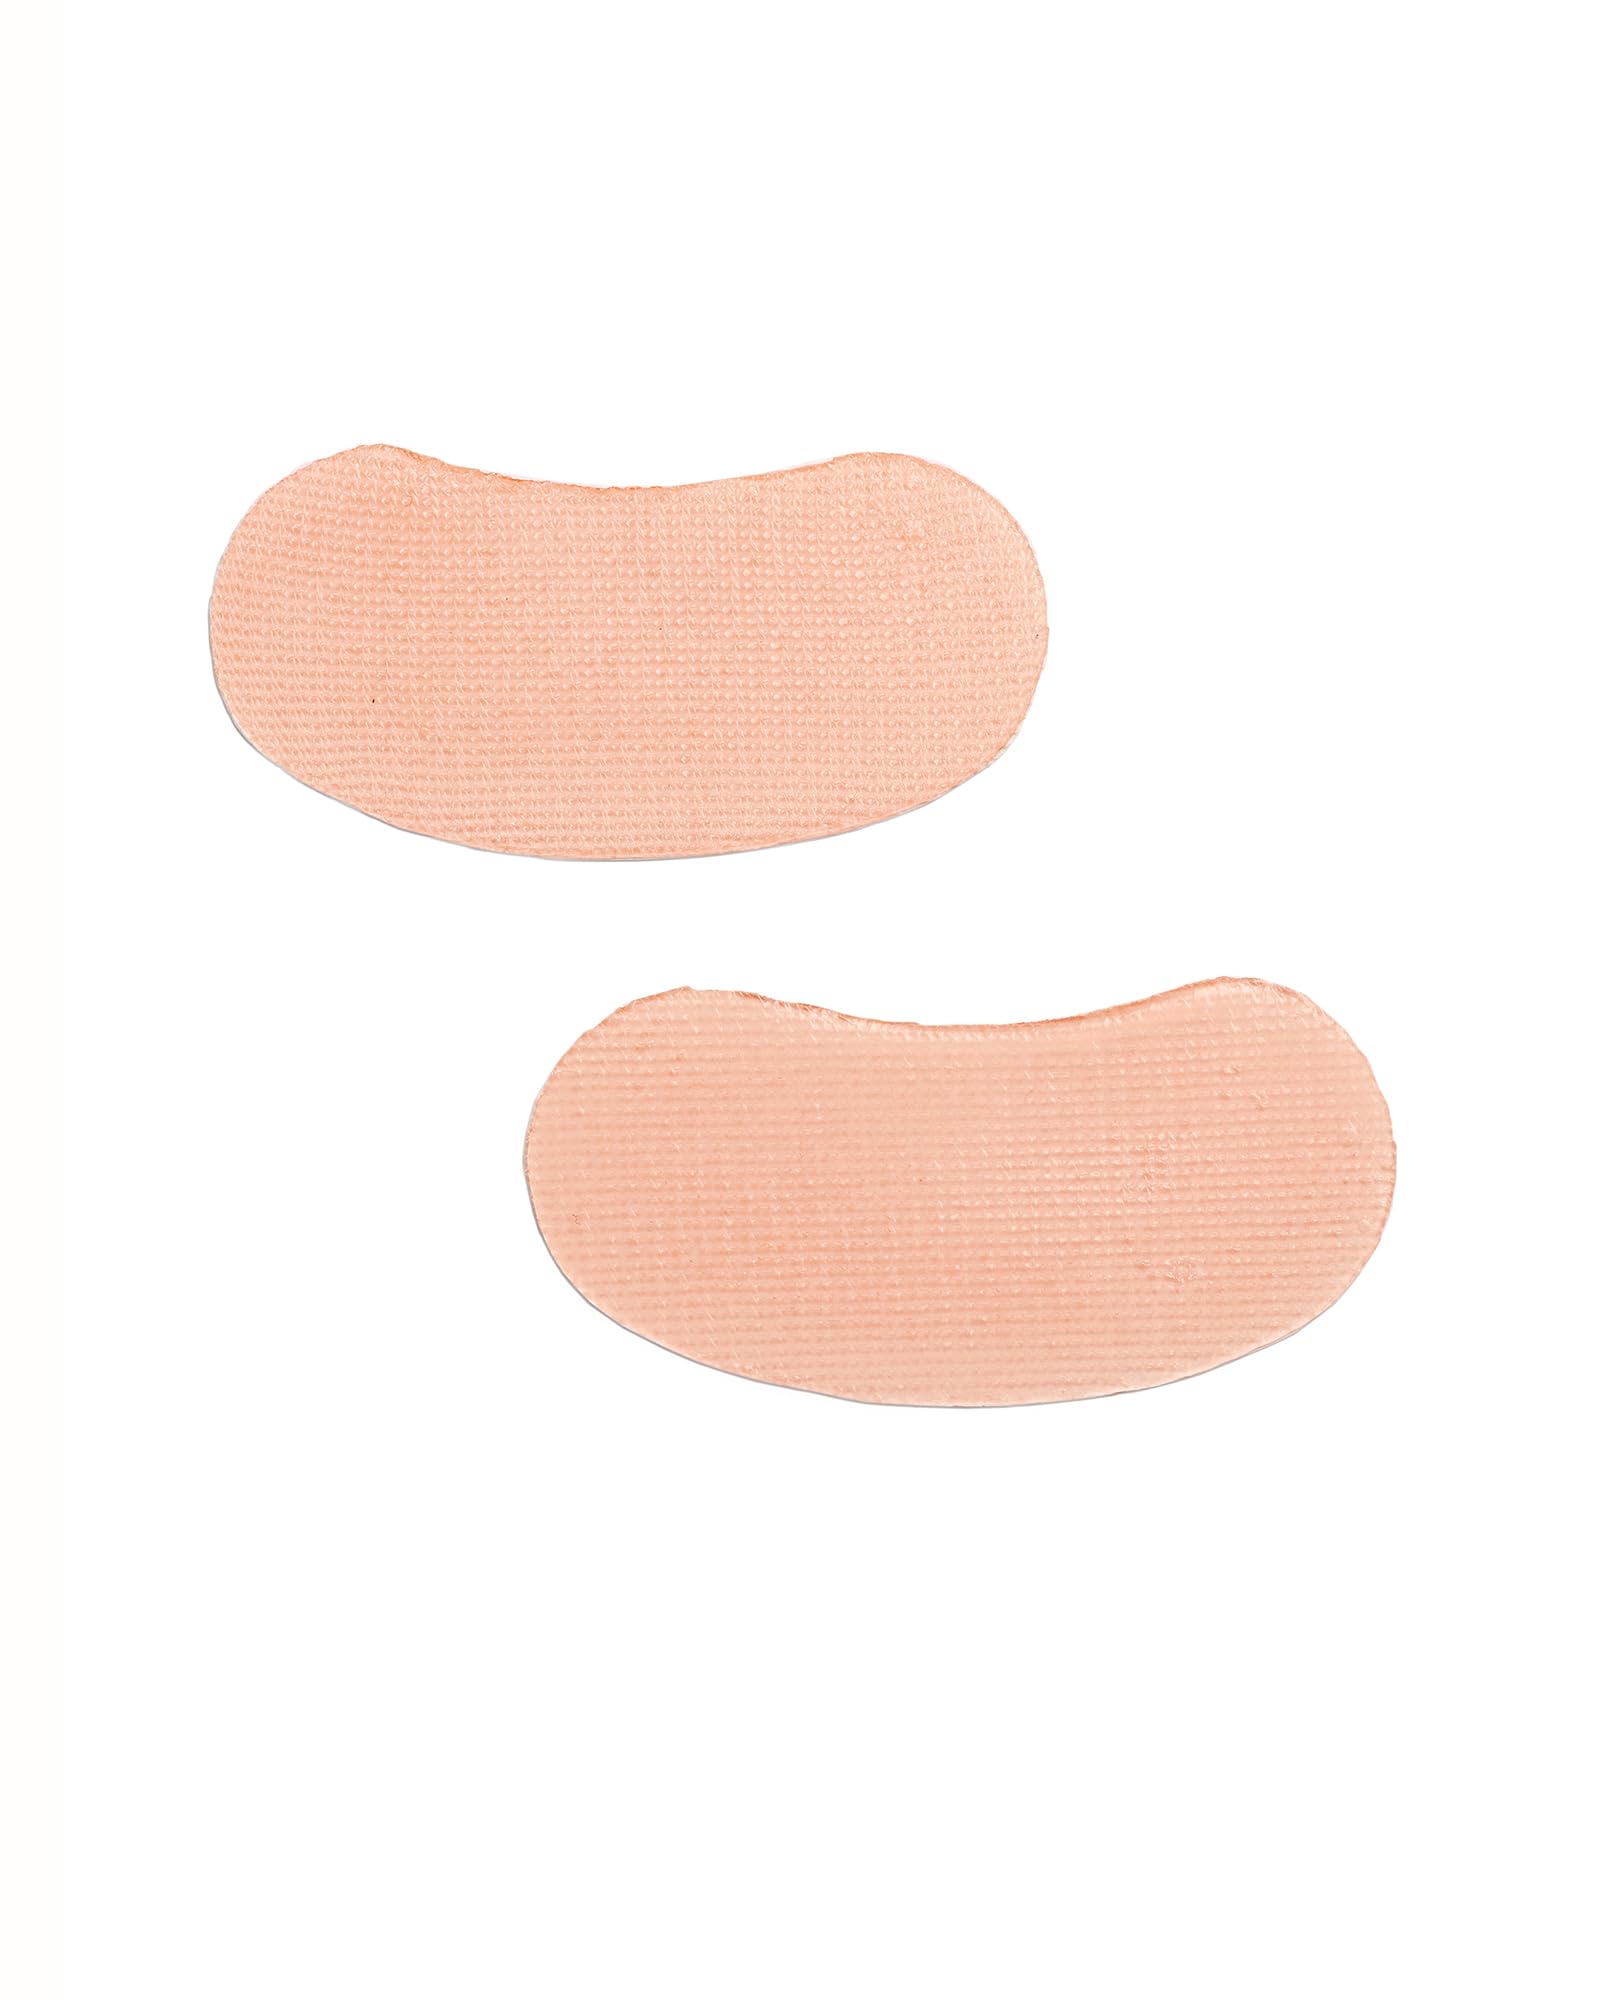 LOOPS WEEKLY RESET - Rejuvenating Hydrogel Eye Mask - Brighten, Hydrate, Nourish and Help Reduce Wrinkles for Refreshed Eyes - Reduces Signs of Puffiness - For Resilient-Looking Skin - 1 Pc